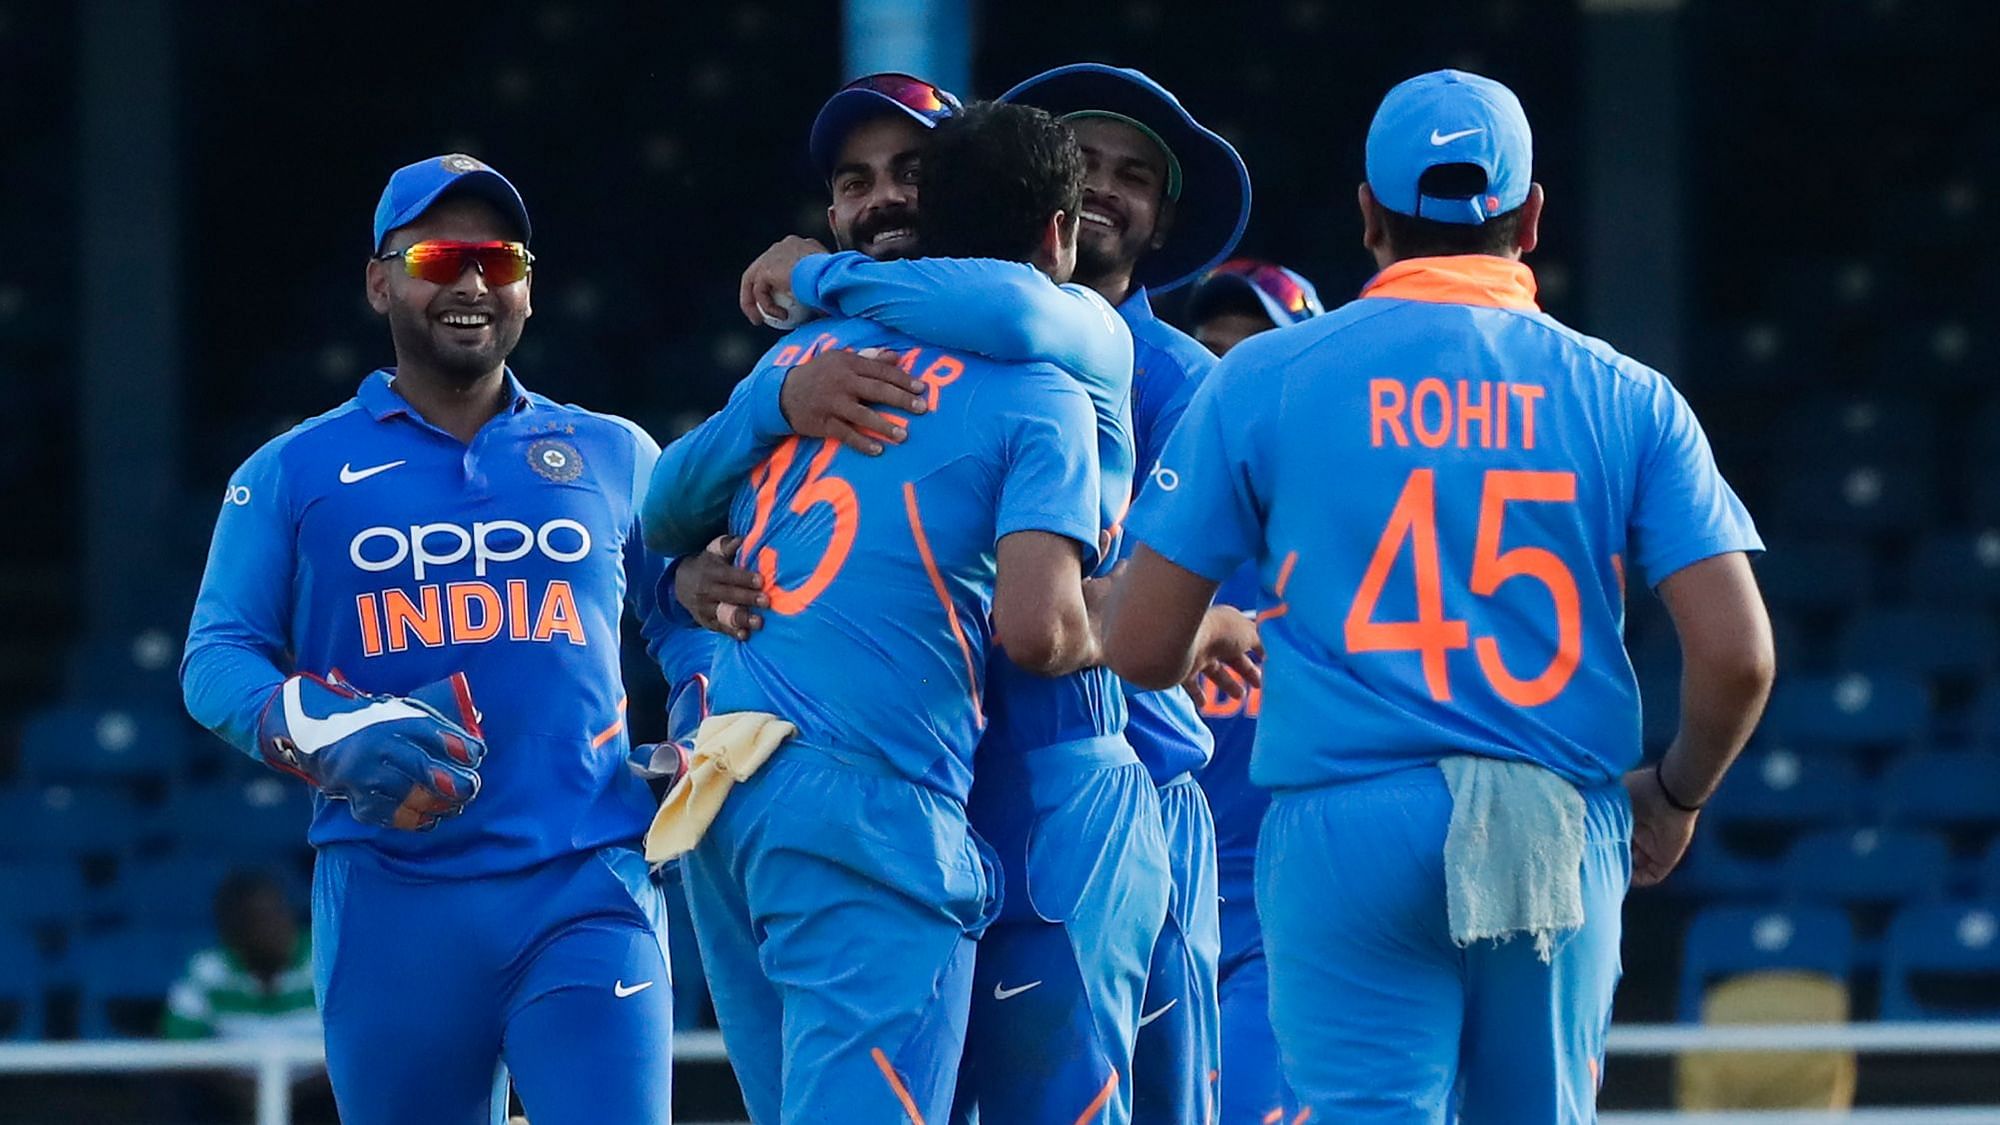 India Vs Afghanistan Live Streaming When and Where To Watch IND vs AFG Asia Cup 2022?